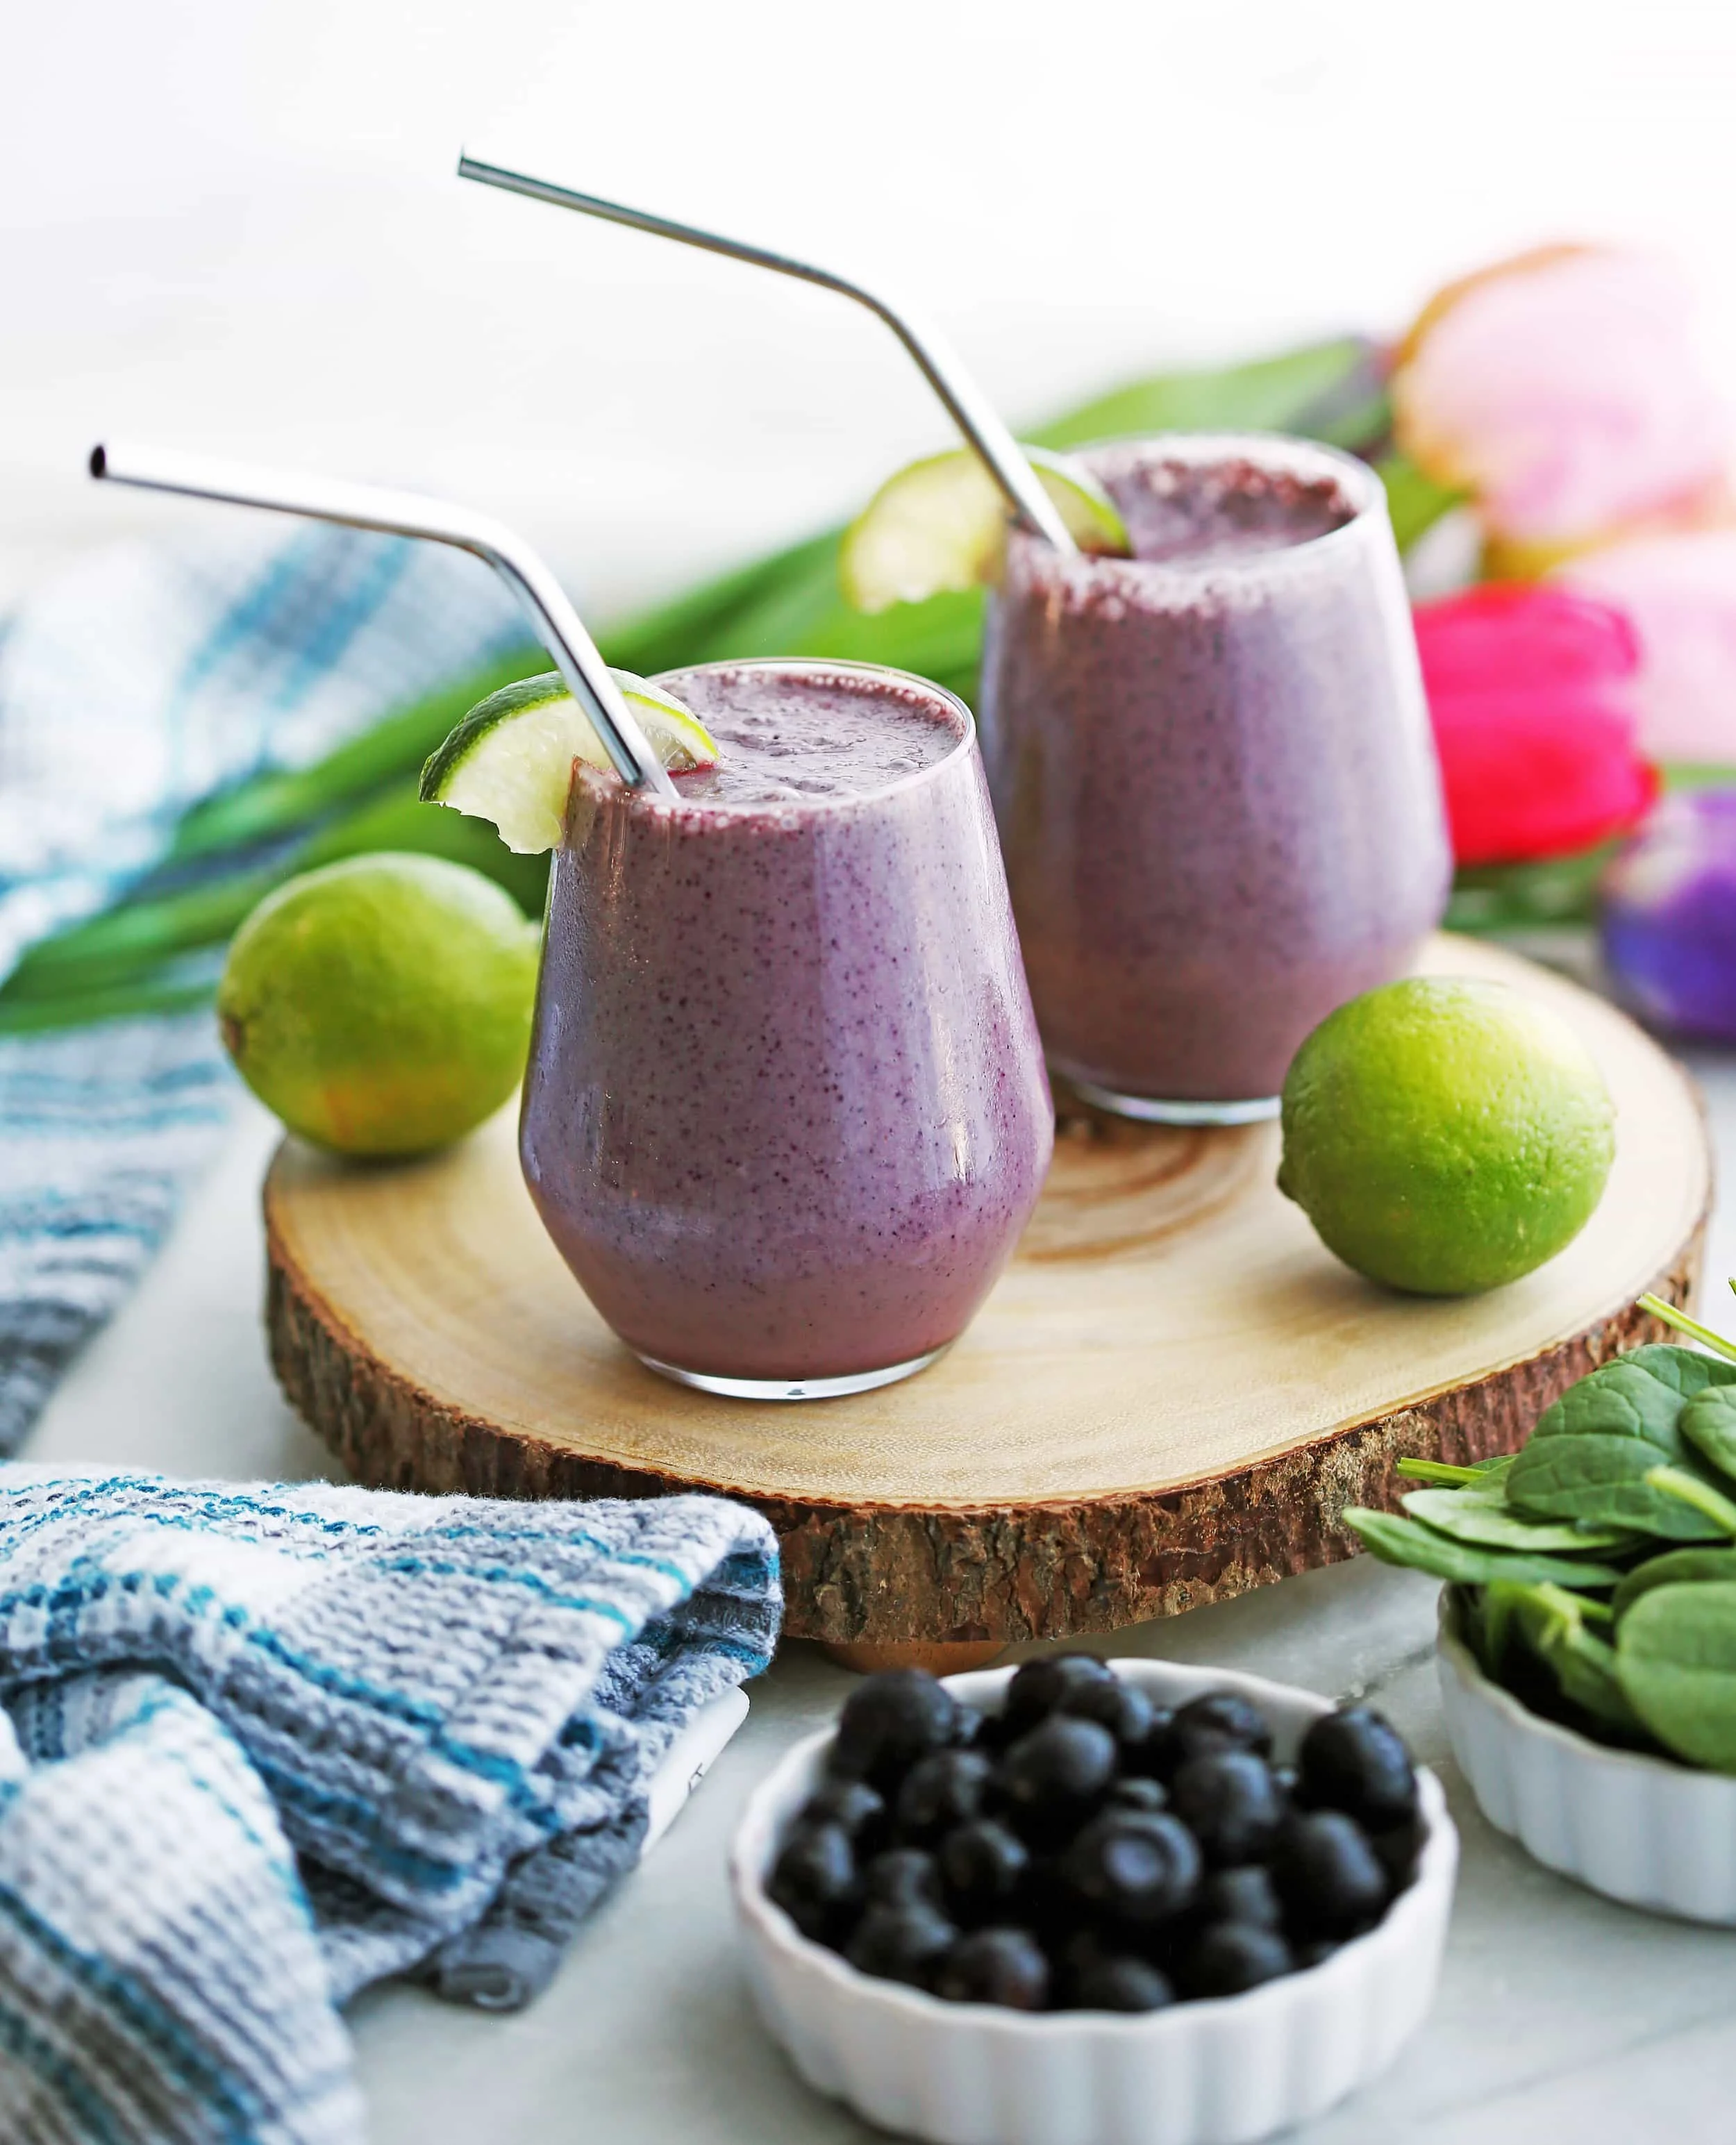 Two Blueberry Lime Yogurt Smoothies on a round wooden board, surrounded by limes, blueberries, and spinach.